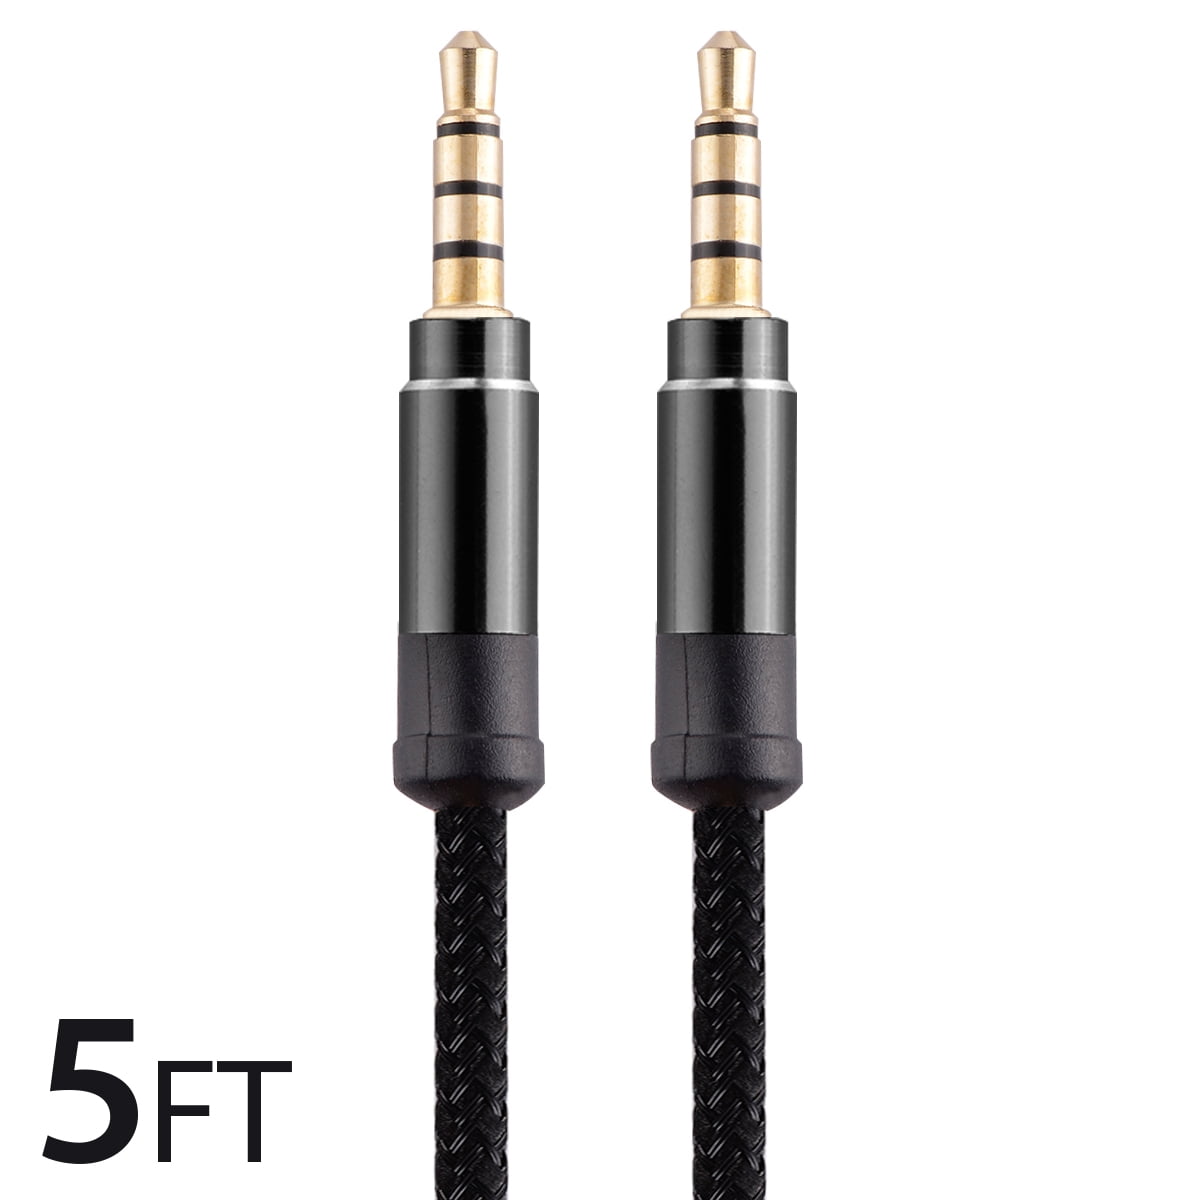  CableCreation 3.5mm to XLR, 3 Feet 3.5mm (1/8 Inch) TRS Stereo  Male to XLR Male Cable Compatible with iPhone, iPod, Tablet,Laptop and  More.Black : Musical Instruments